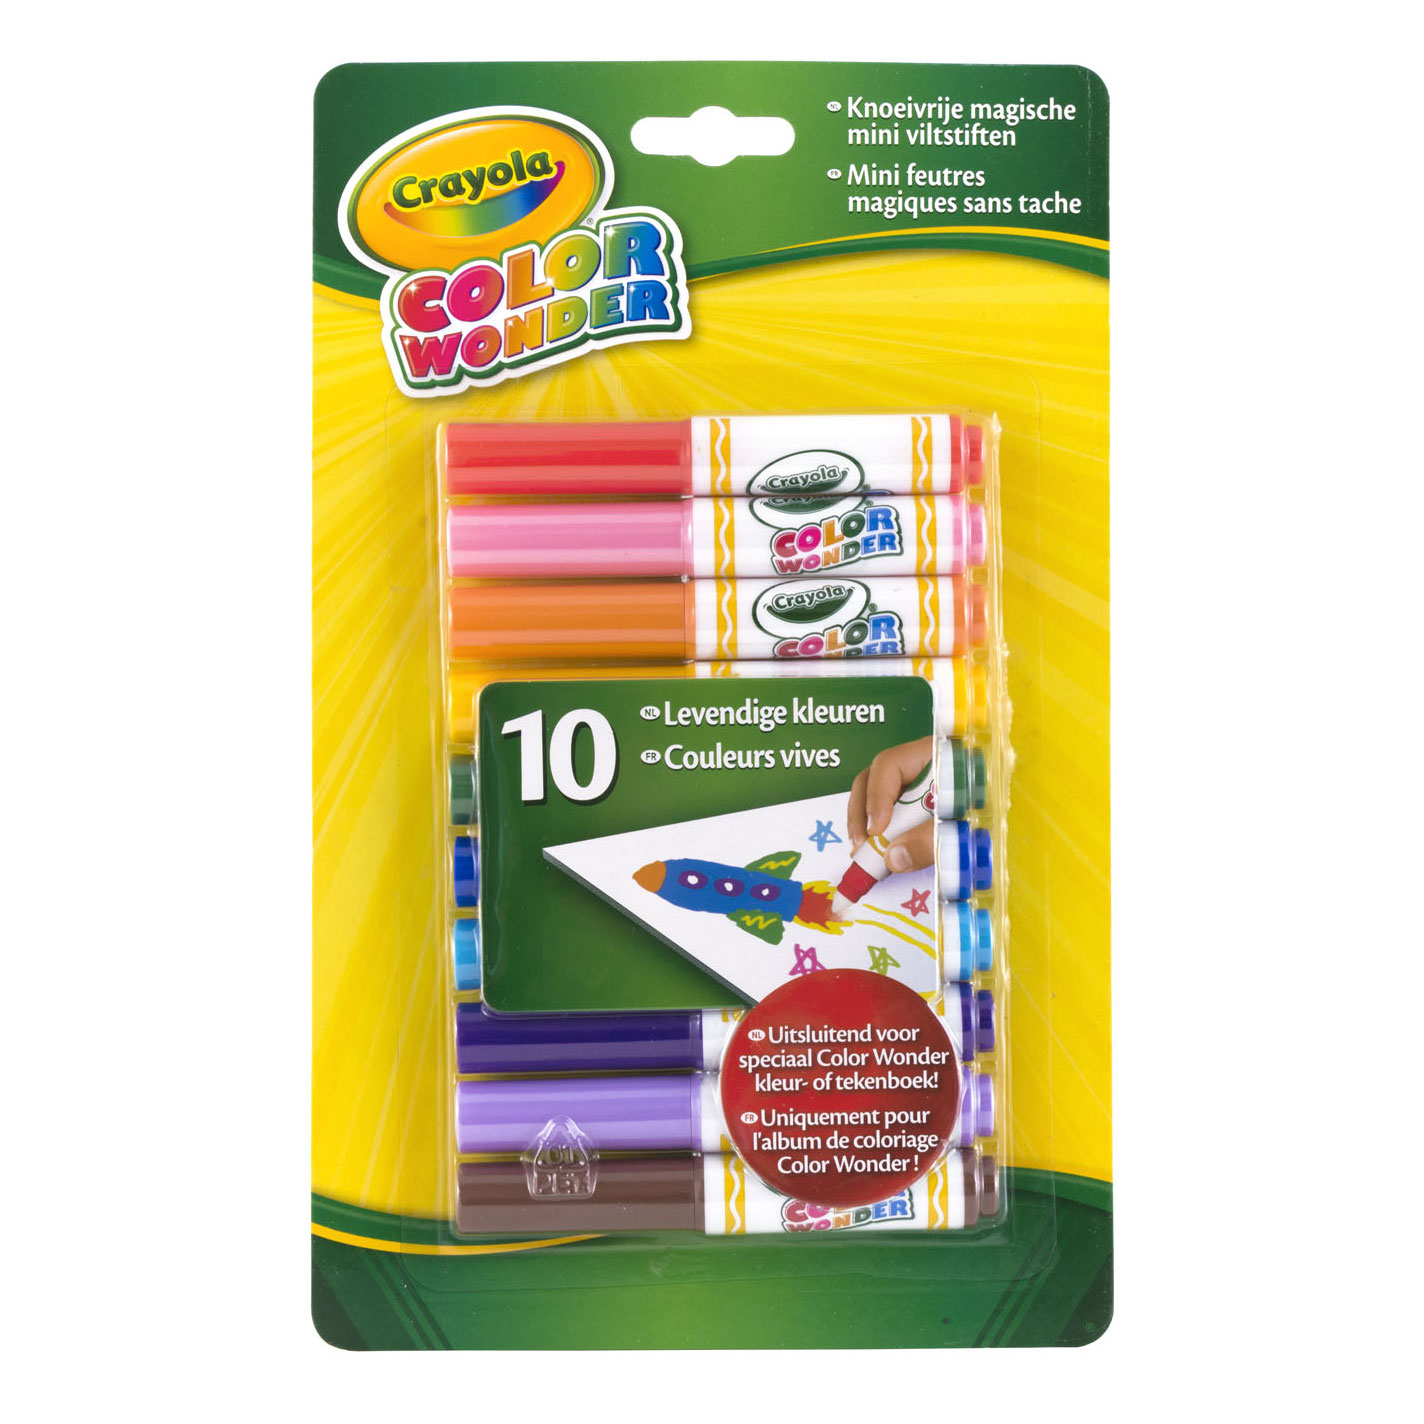 Crayola Color Wonder Markers, Mess Free - 6 markers